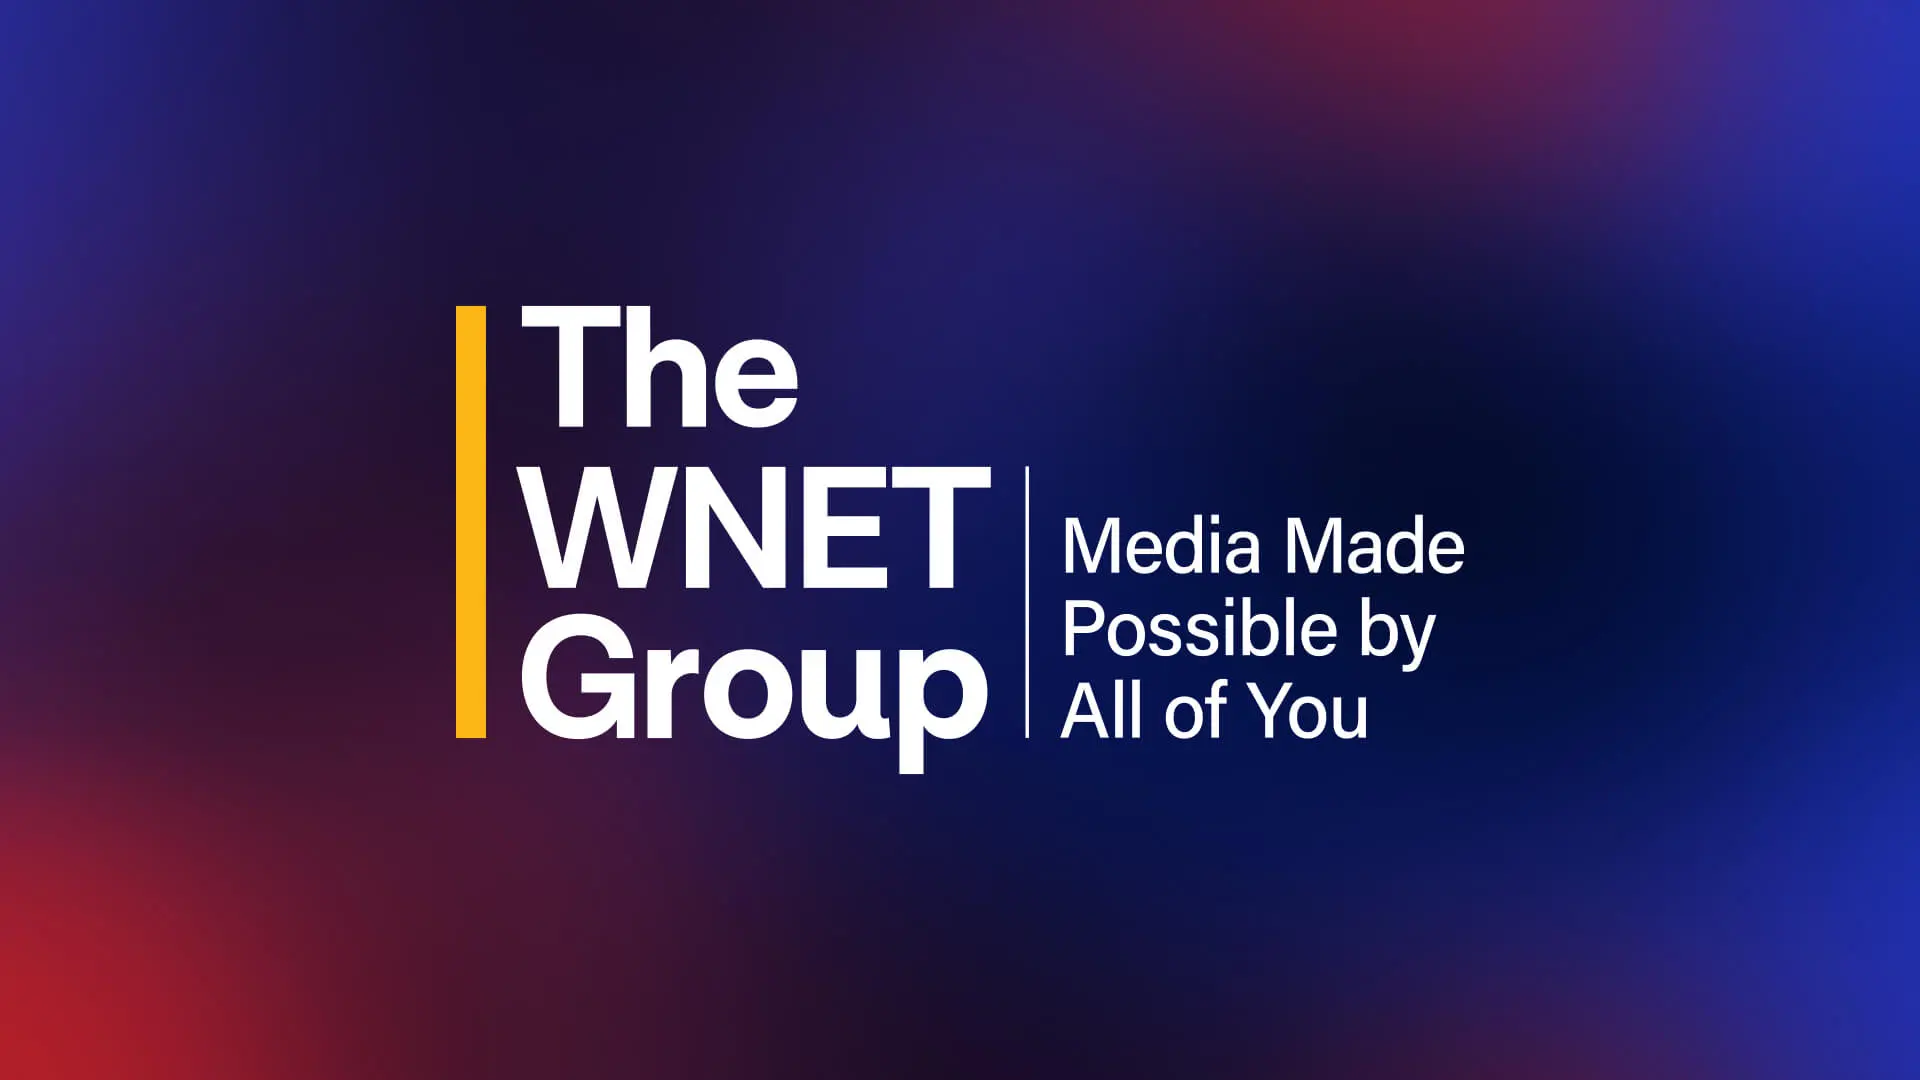 A graphic for the wnet group with the tagline "media made possible by all of you" against a blue and purple gradient background.